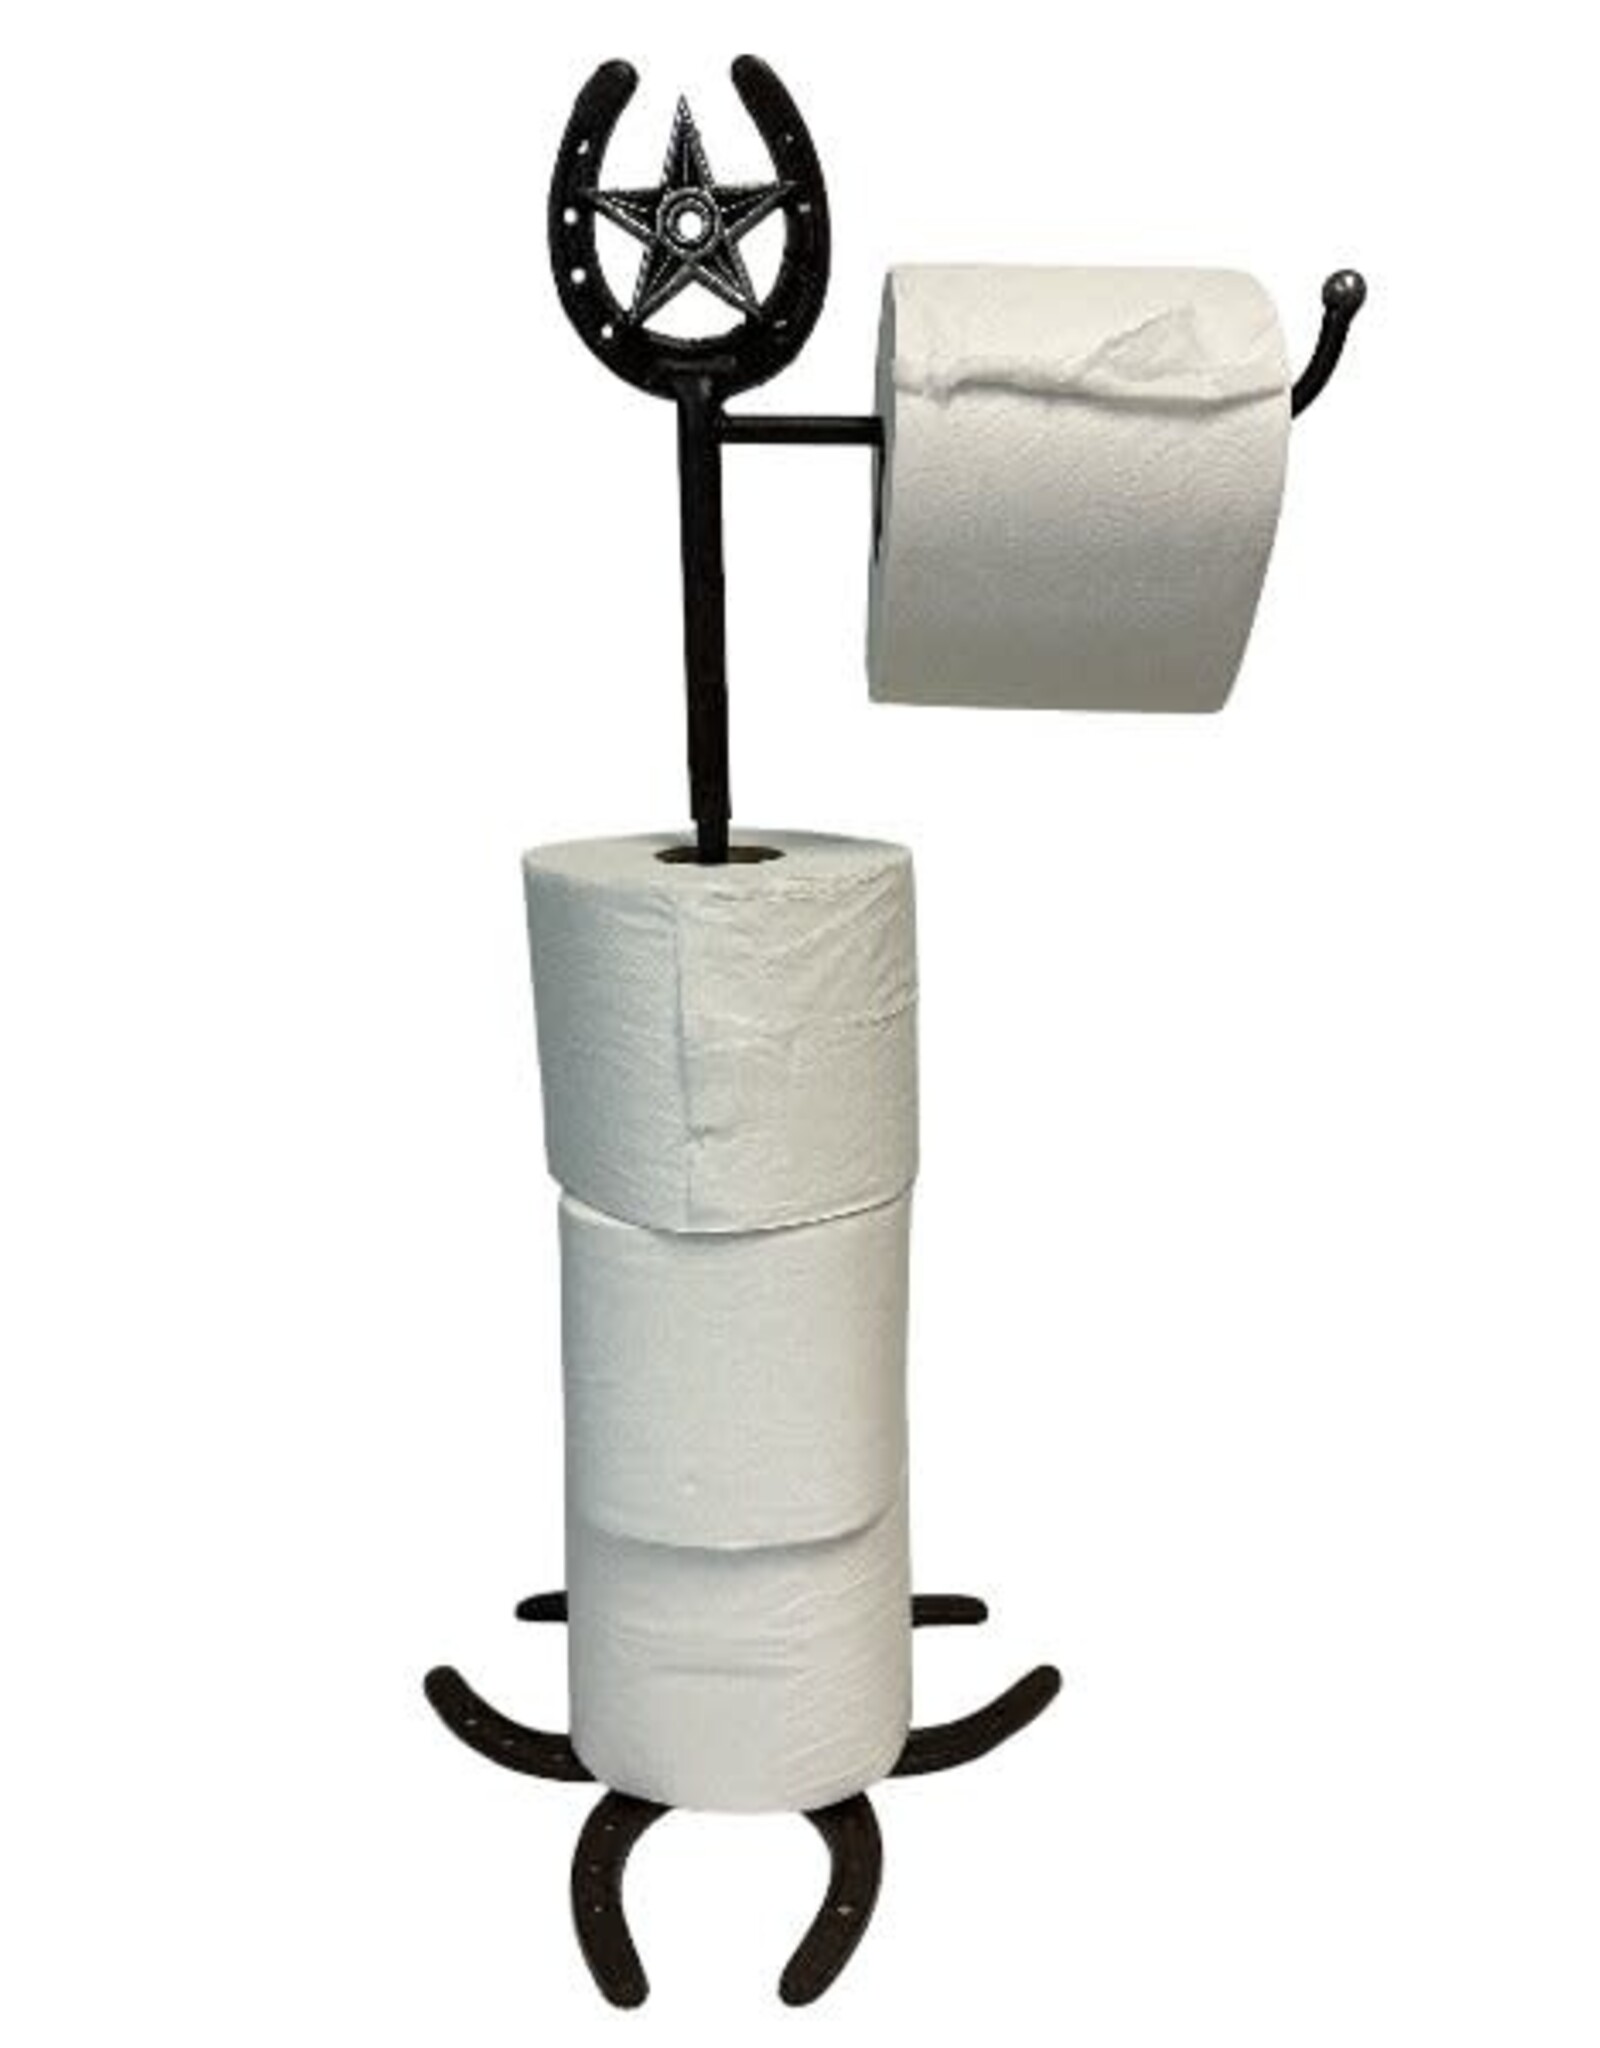 Metal Horseshoe Star Toilet Paper Holder and Stand